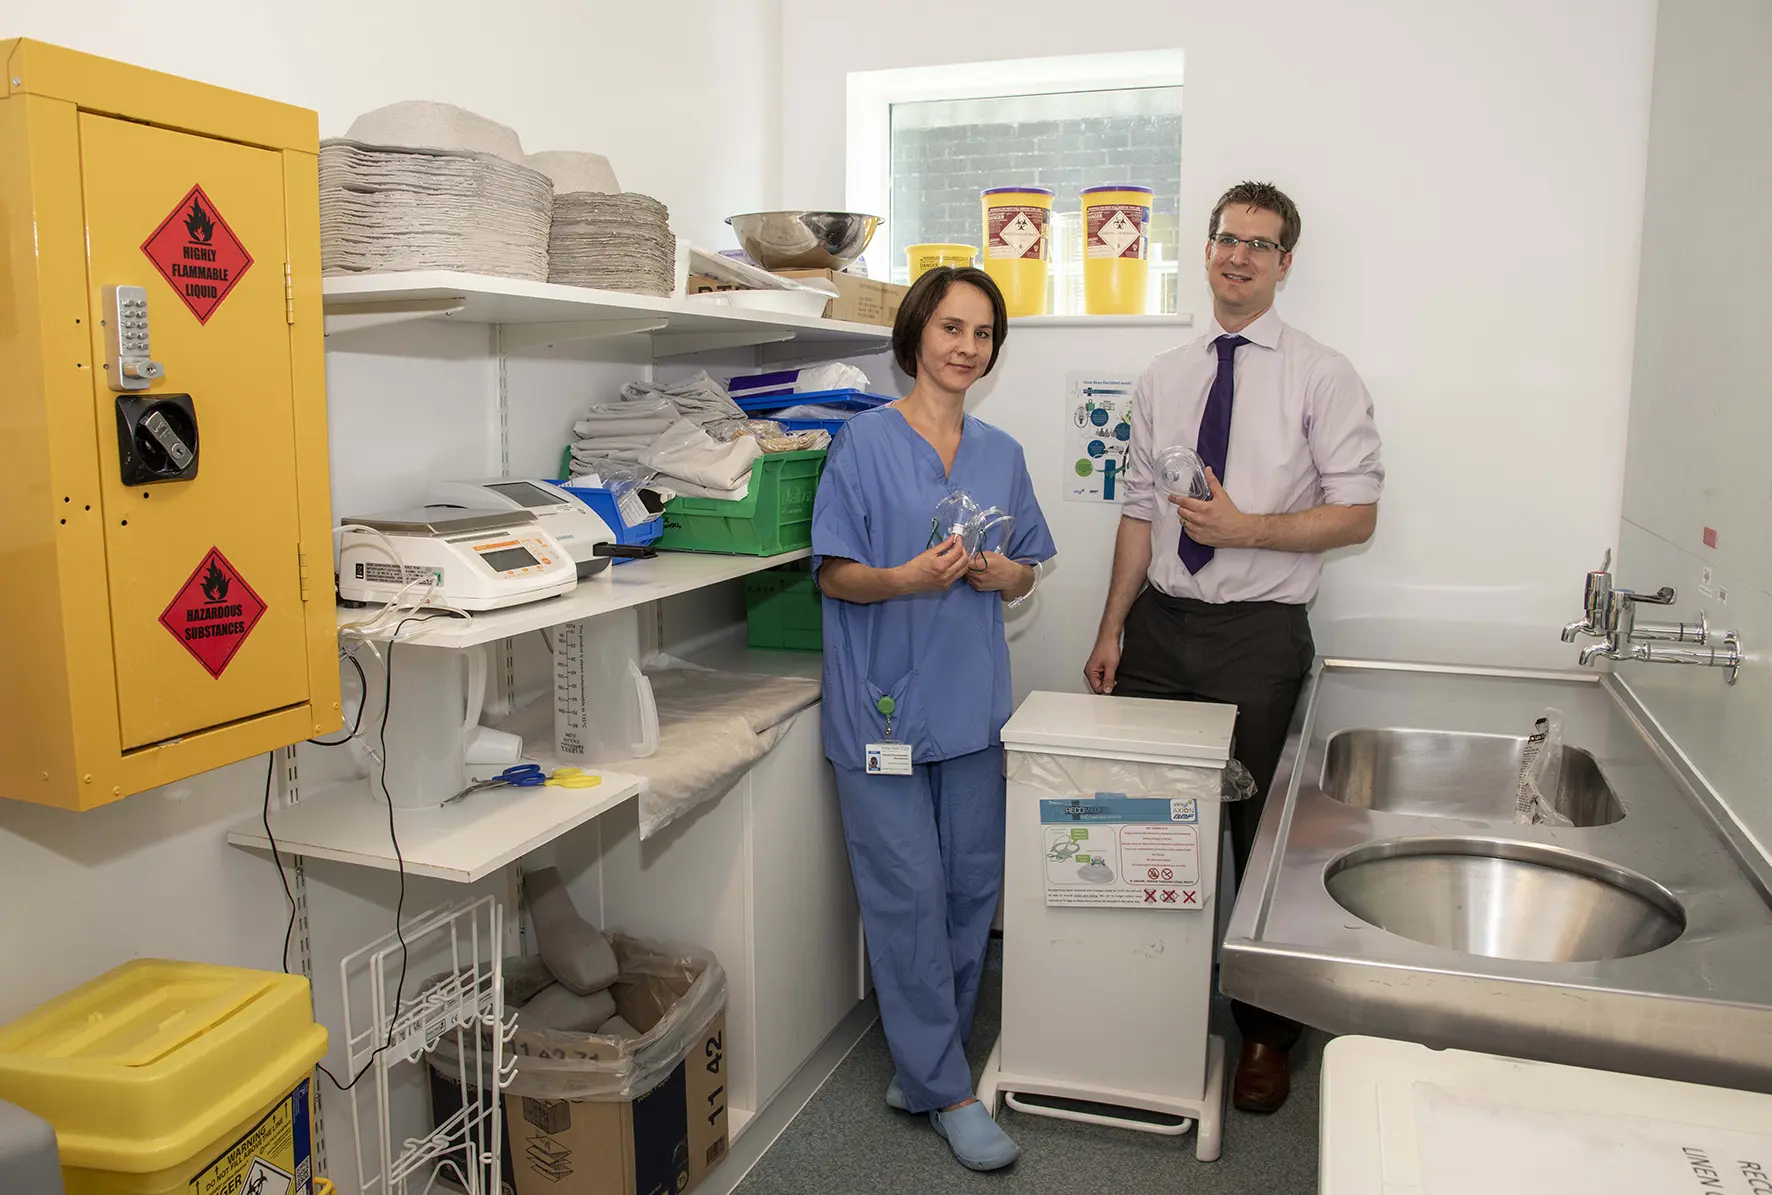 Around 500kgs of PVC has been collected at Wexham Park Hospital alone and, since August 2018, removing recyclable PVC from the incineration waste stream overall has saved the Trust around £200.